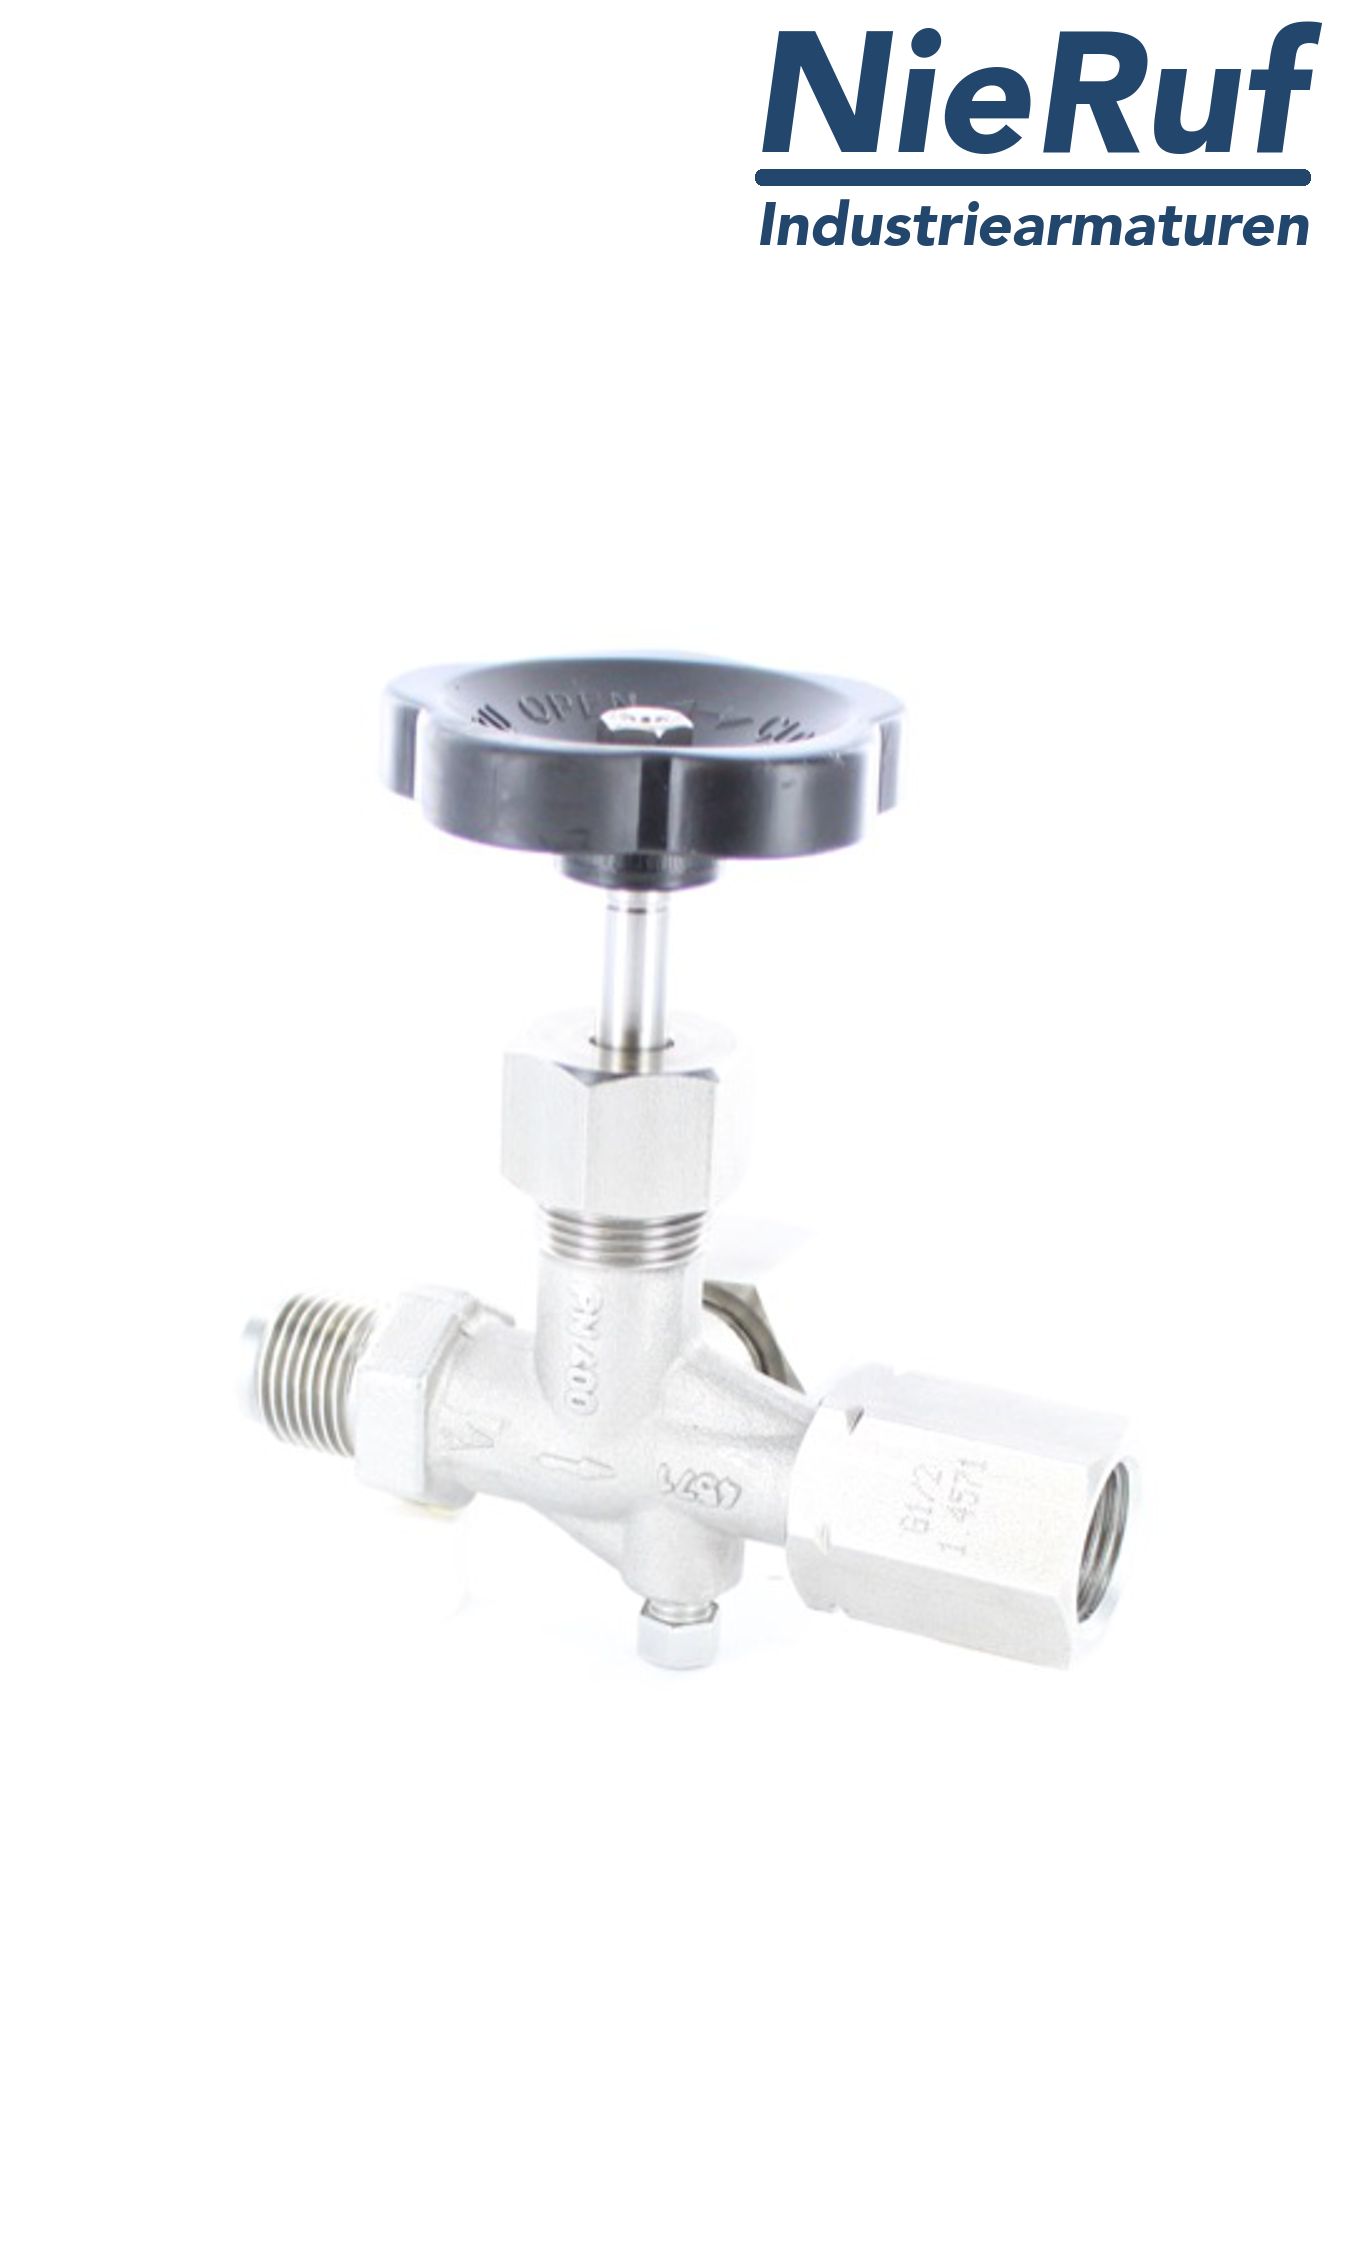 manometer gauge valves male thread x sleeve x test connector M20x1,5 DIN 16271 stainless steel 1.4571 400 bar